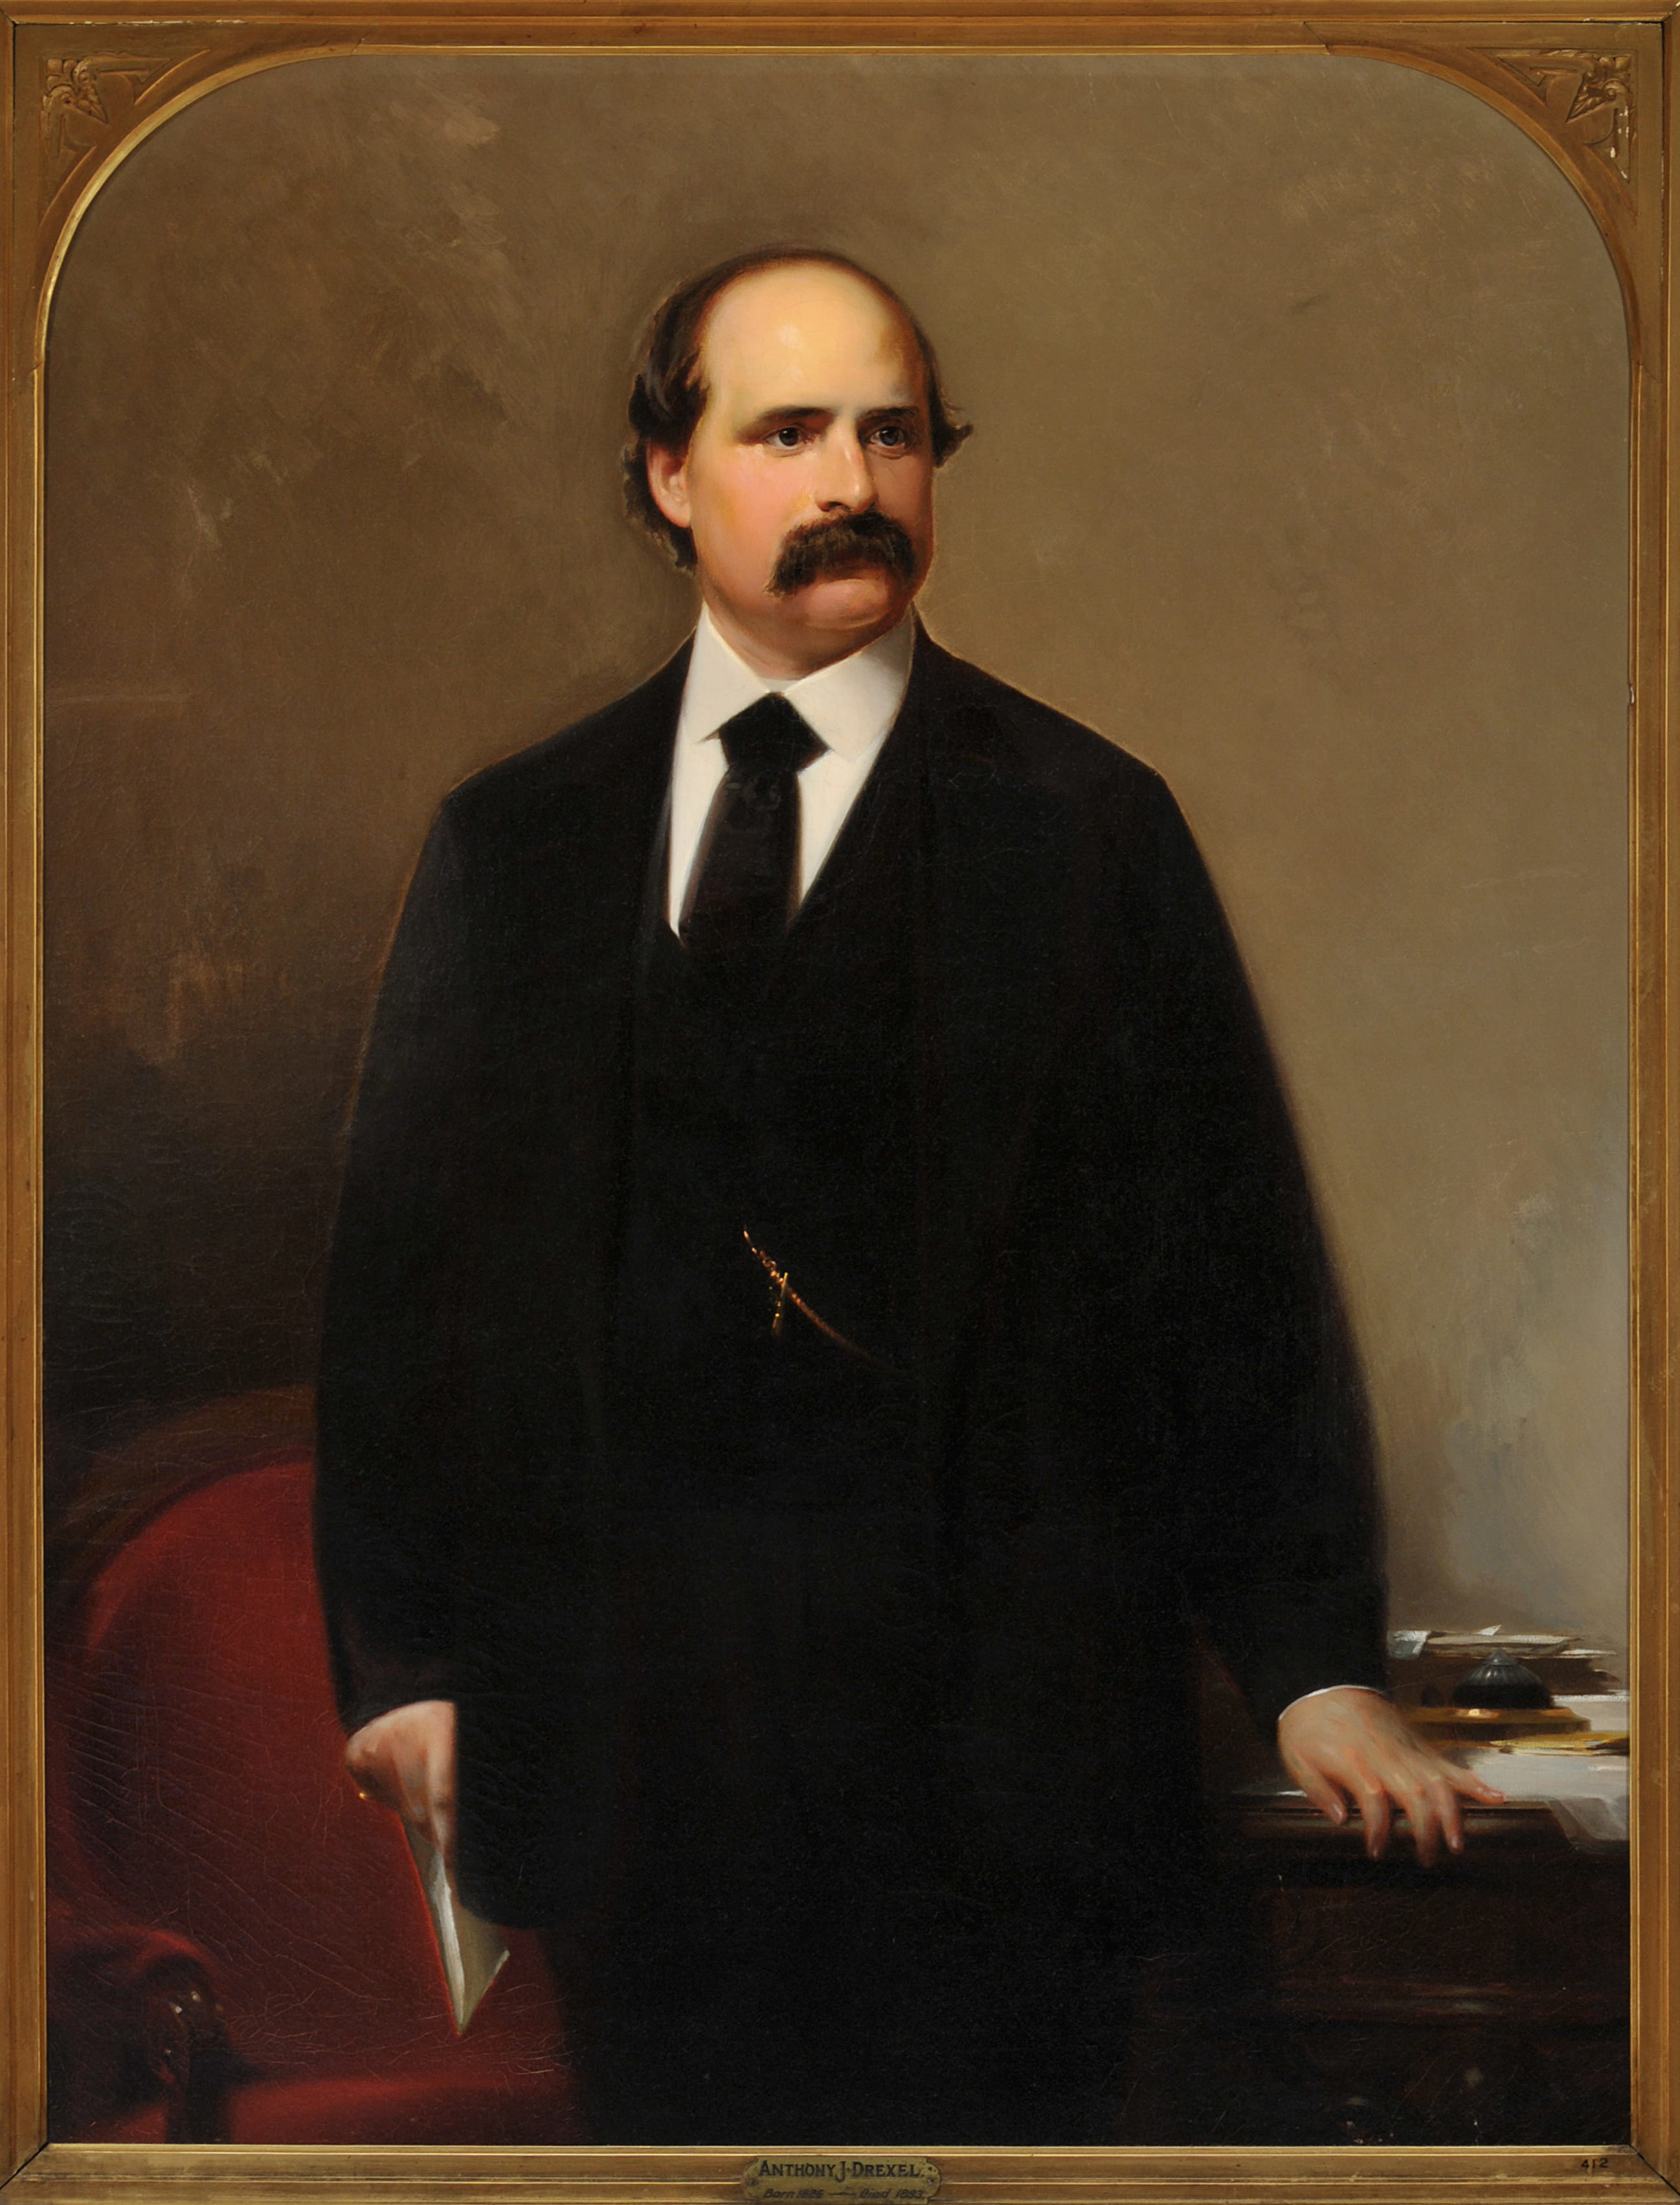 "Portrait of Anthony J. Drexel (1826-1893)" was painted by Josef Bergenthal in 1860, when Tony was 34 years old. Photo courtesy The Drexel Collection.